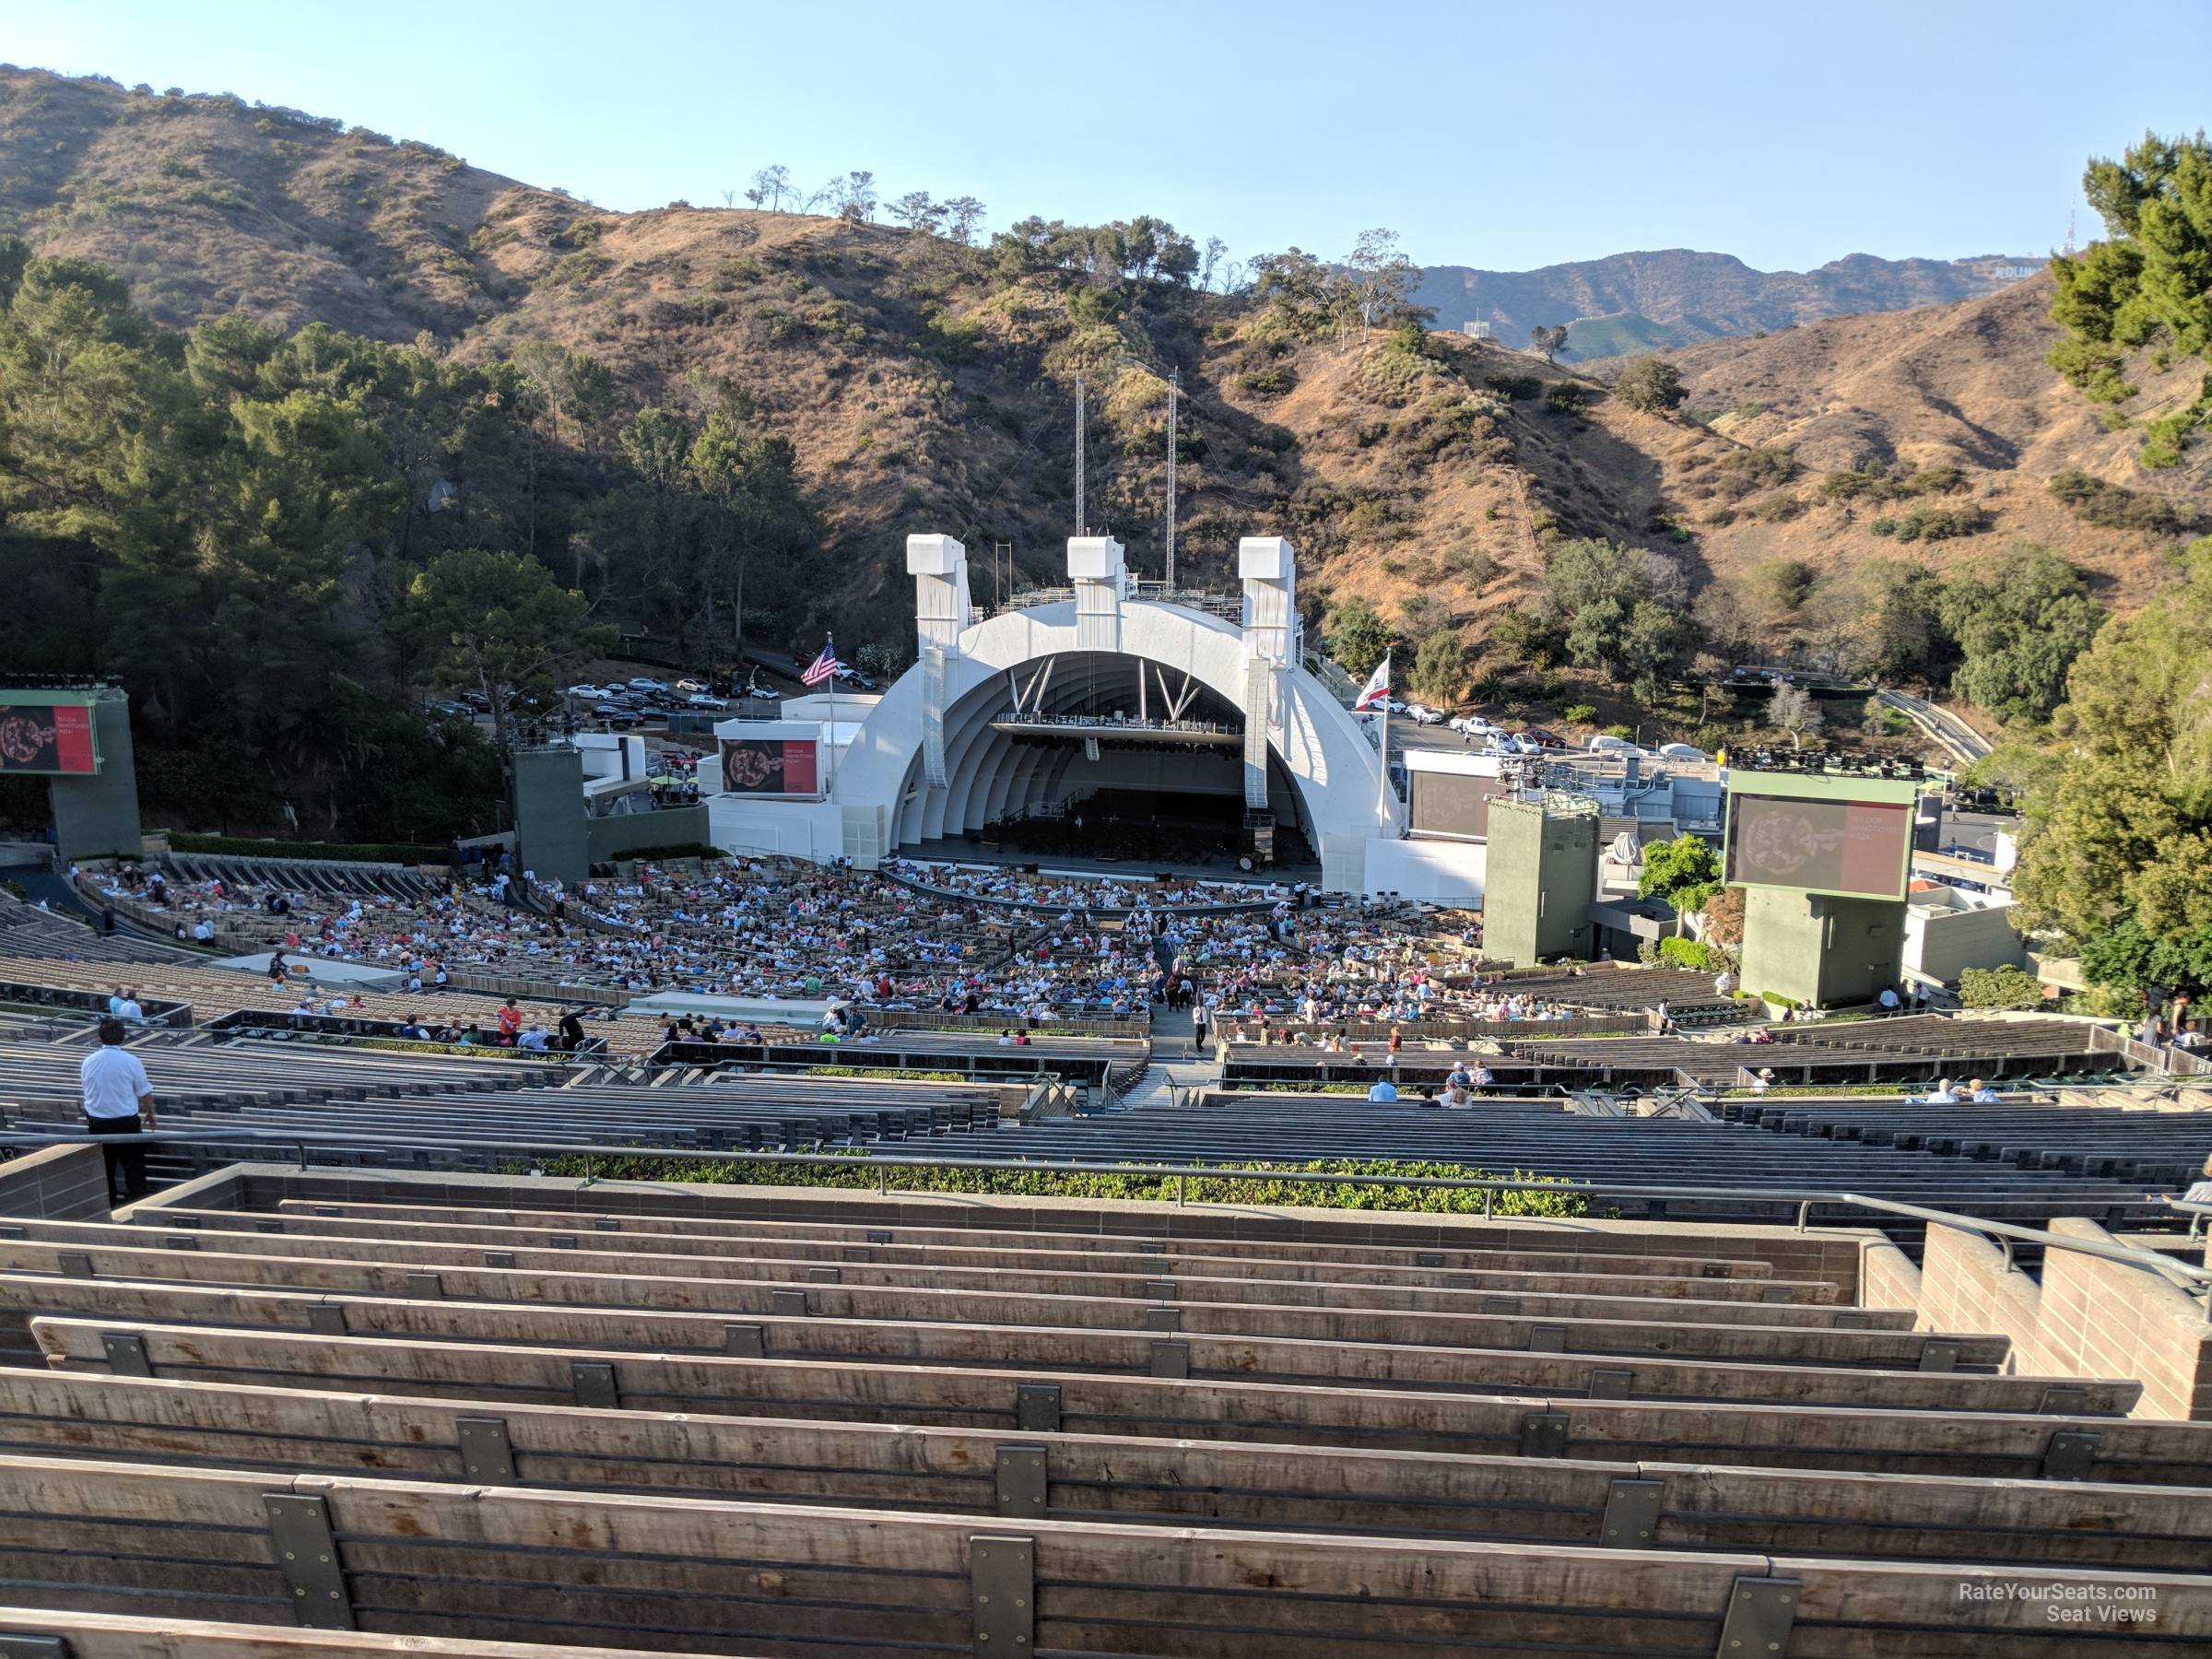 Hollywood Bowl Section Q1 - RateYourSeats.com